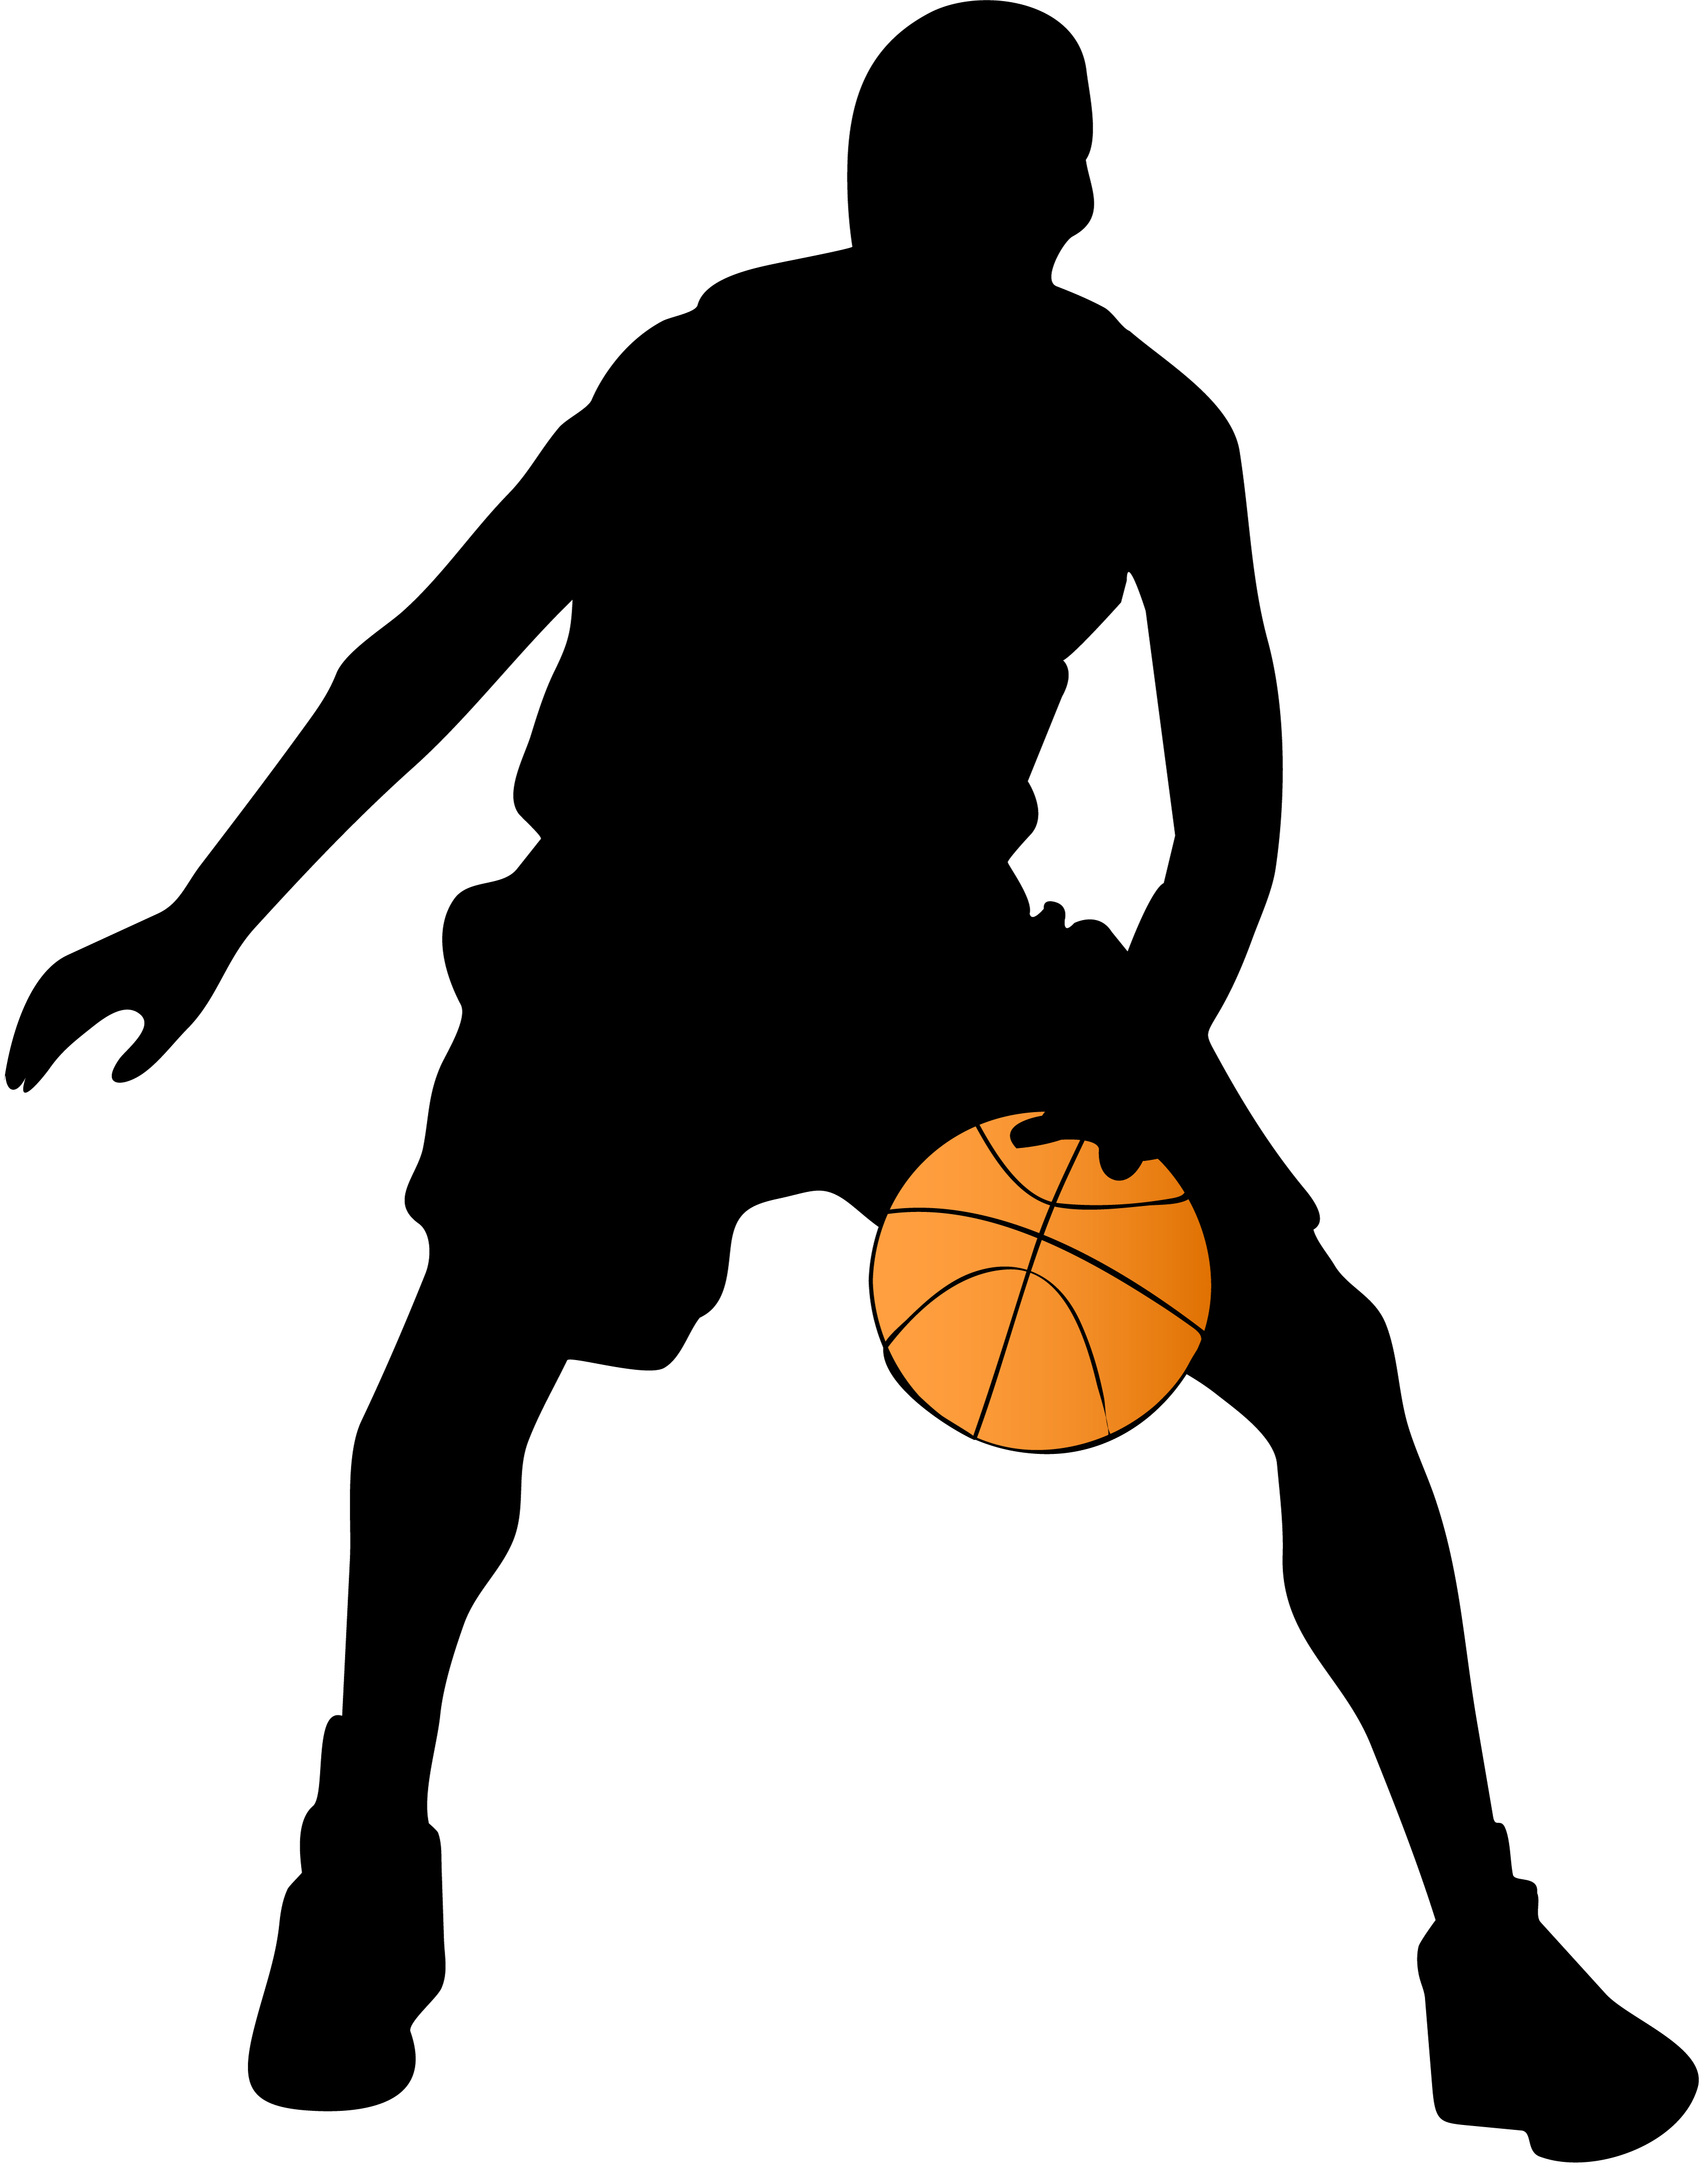 Basketball Silhouette Png - ClipArt Best